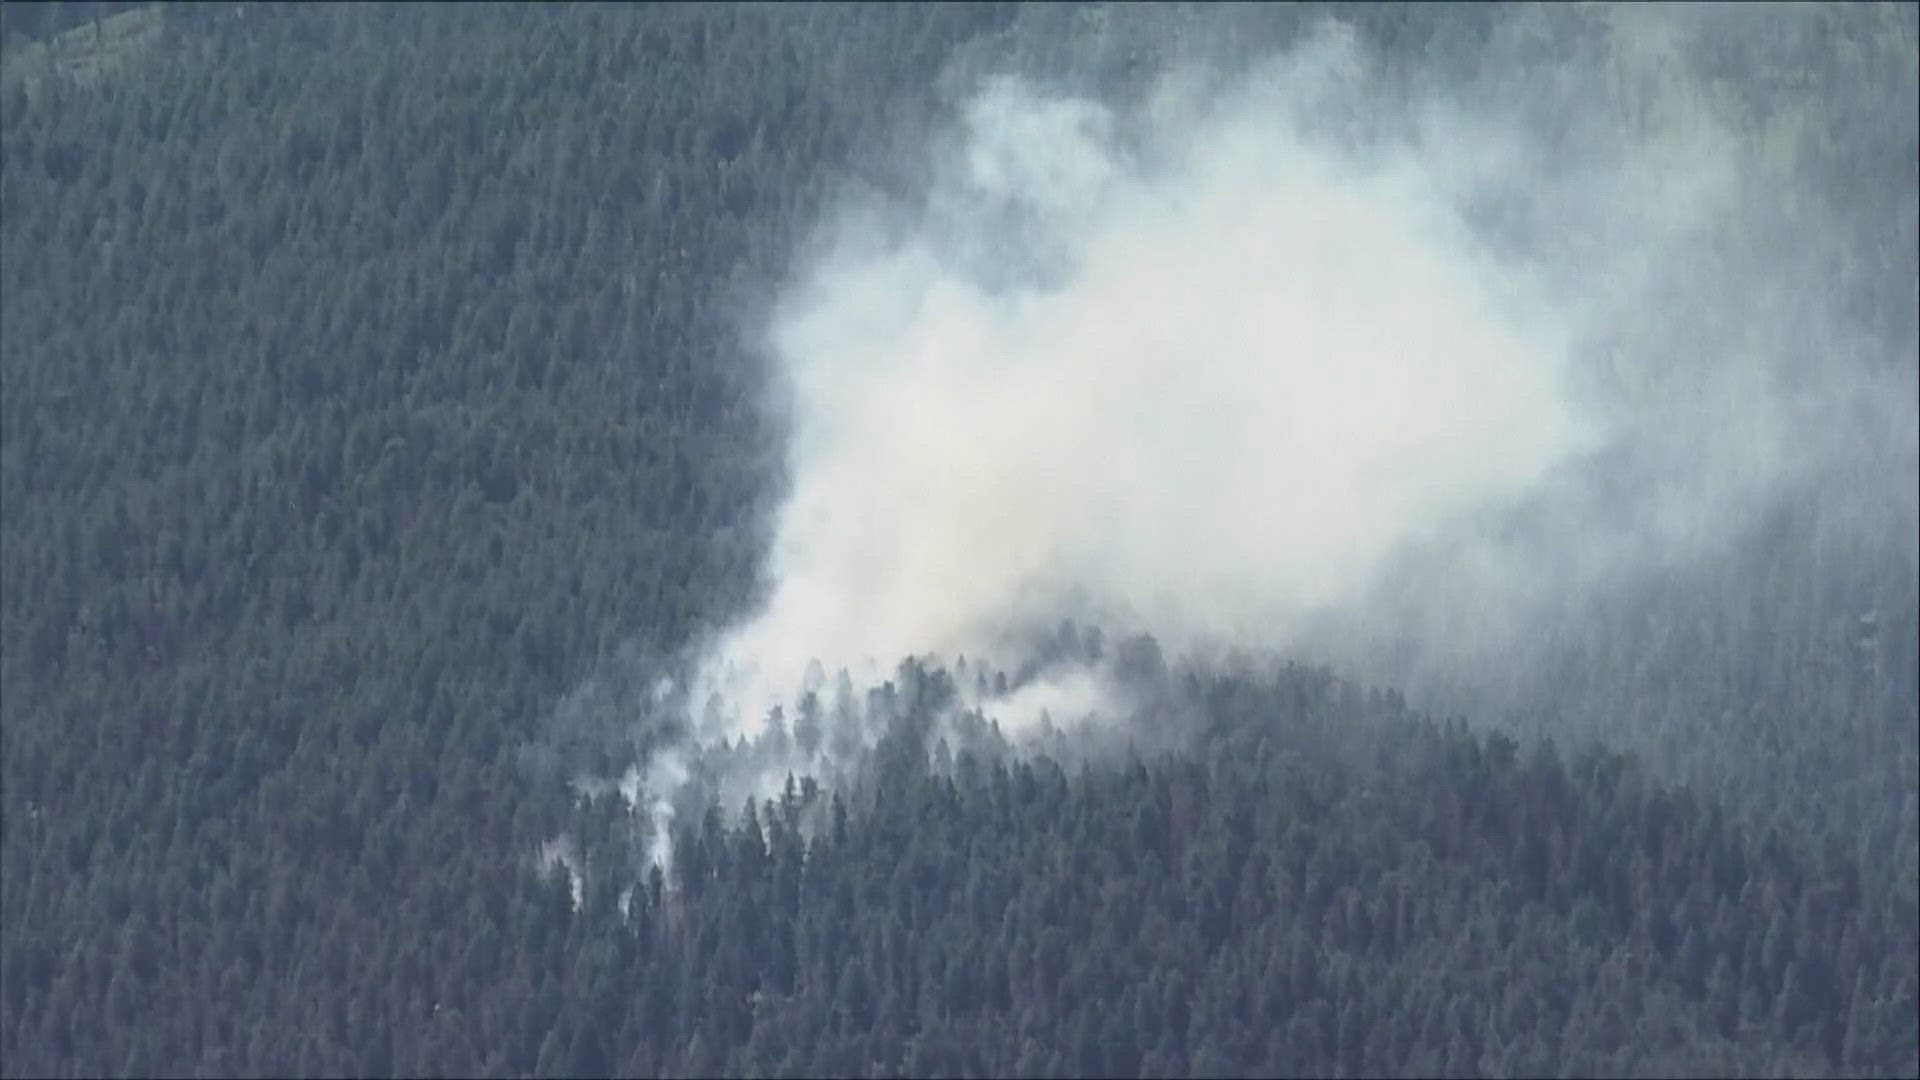 The U.S. Forest Service said the Bear Creek Fire is about three acres in size and was caused by lightning.